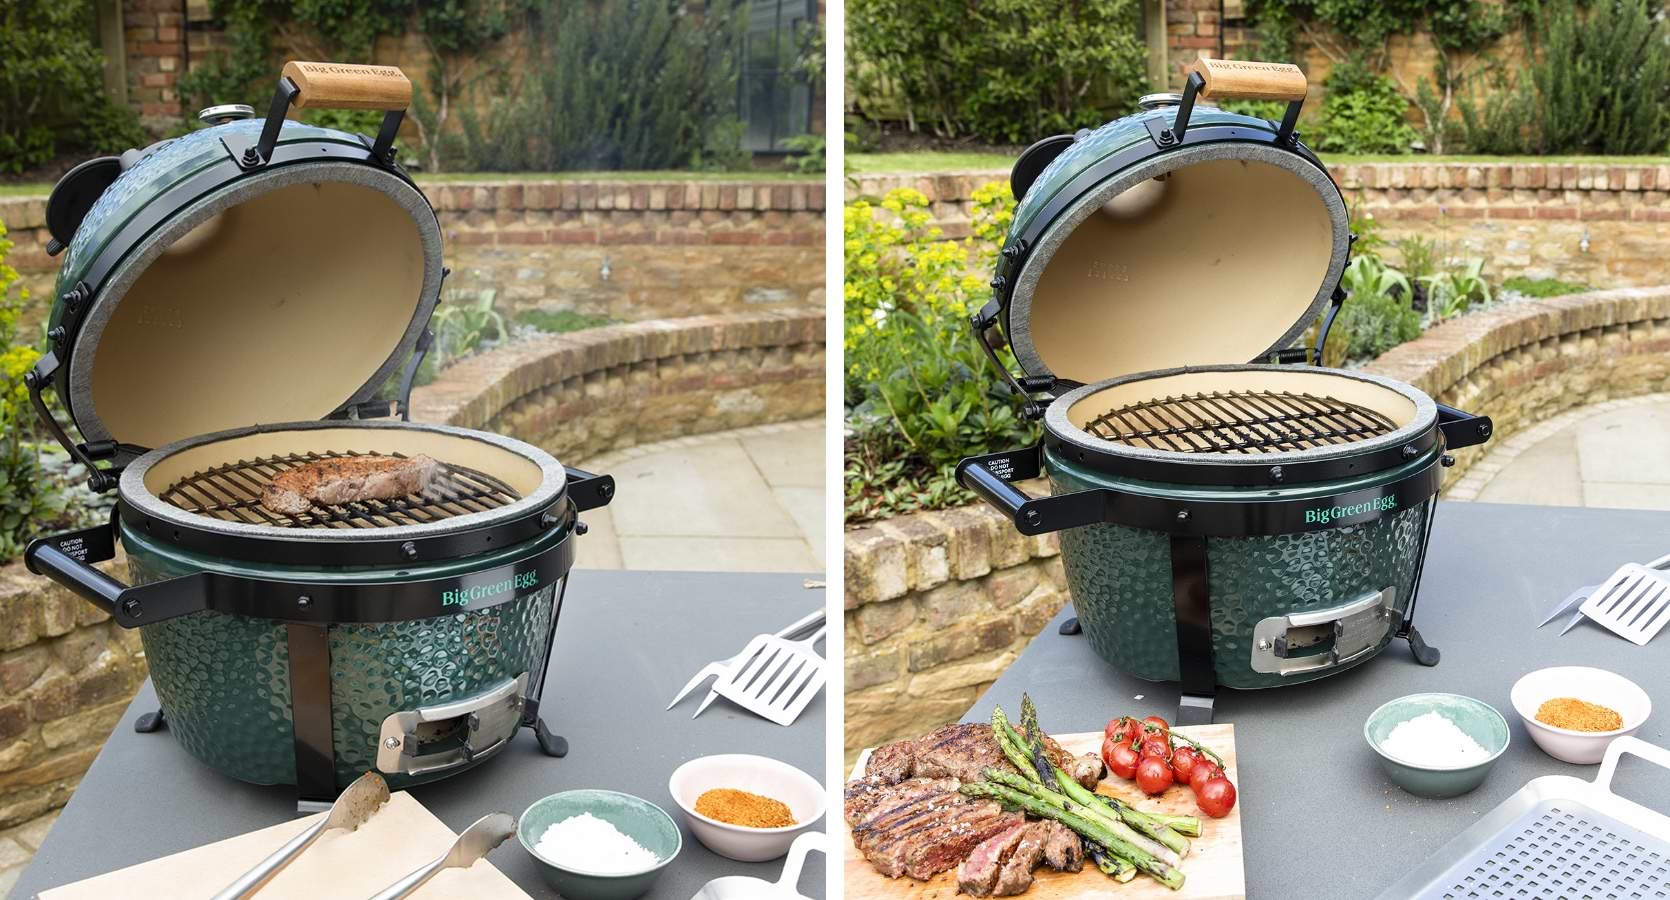 Big Green Egg MiniMax with lid open, sitting on Garden Trading's Chilford Dining Table, showing grill interior and prepared meat and vegetables